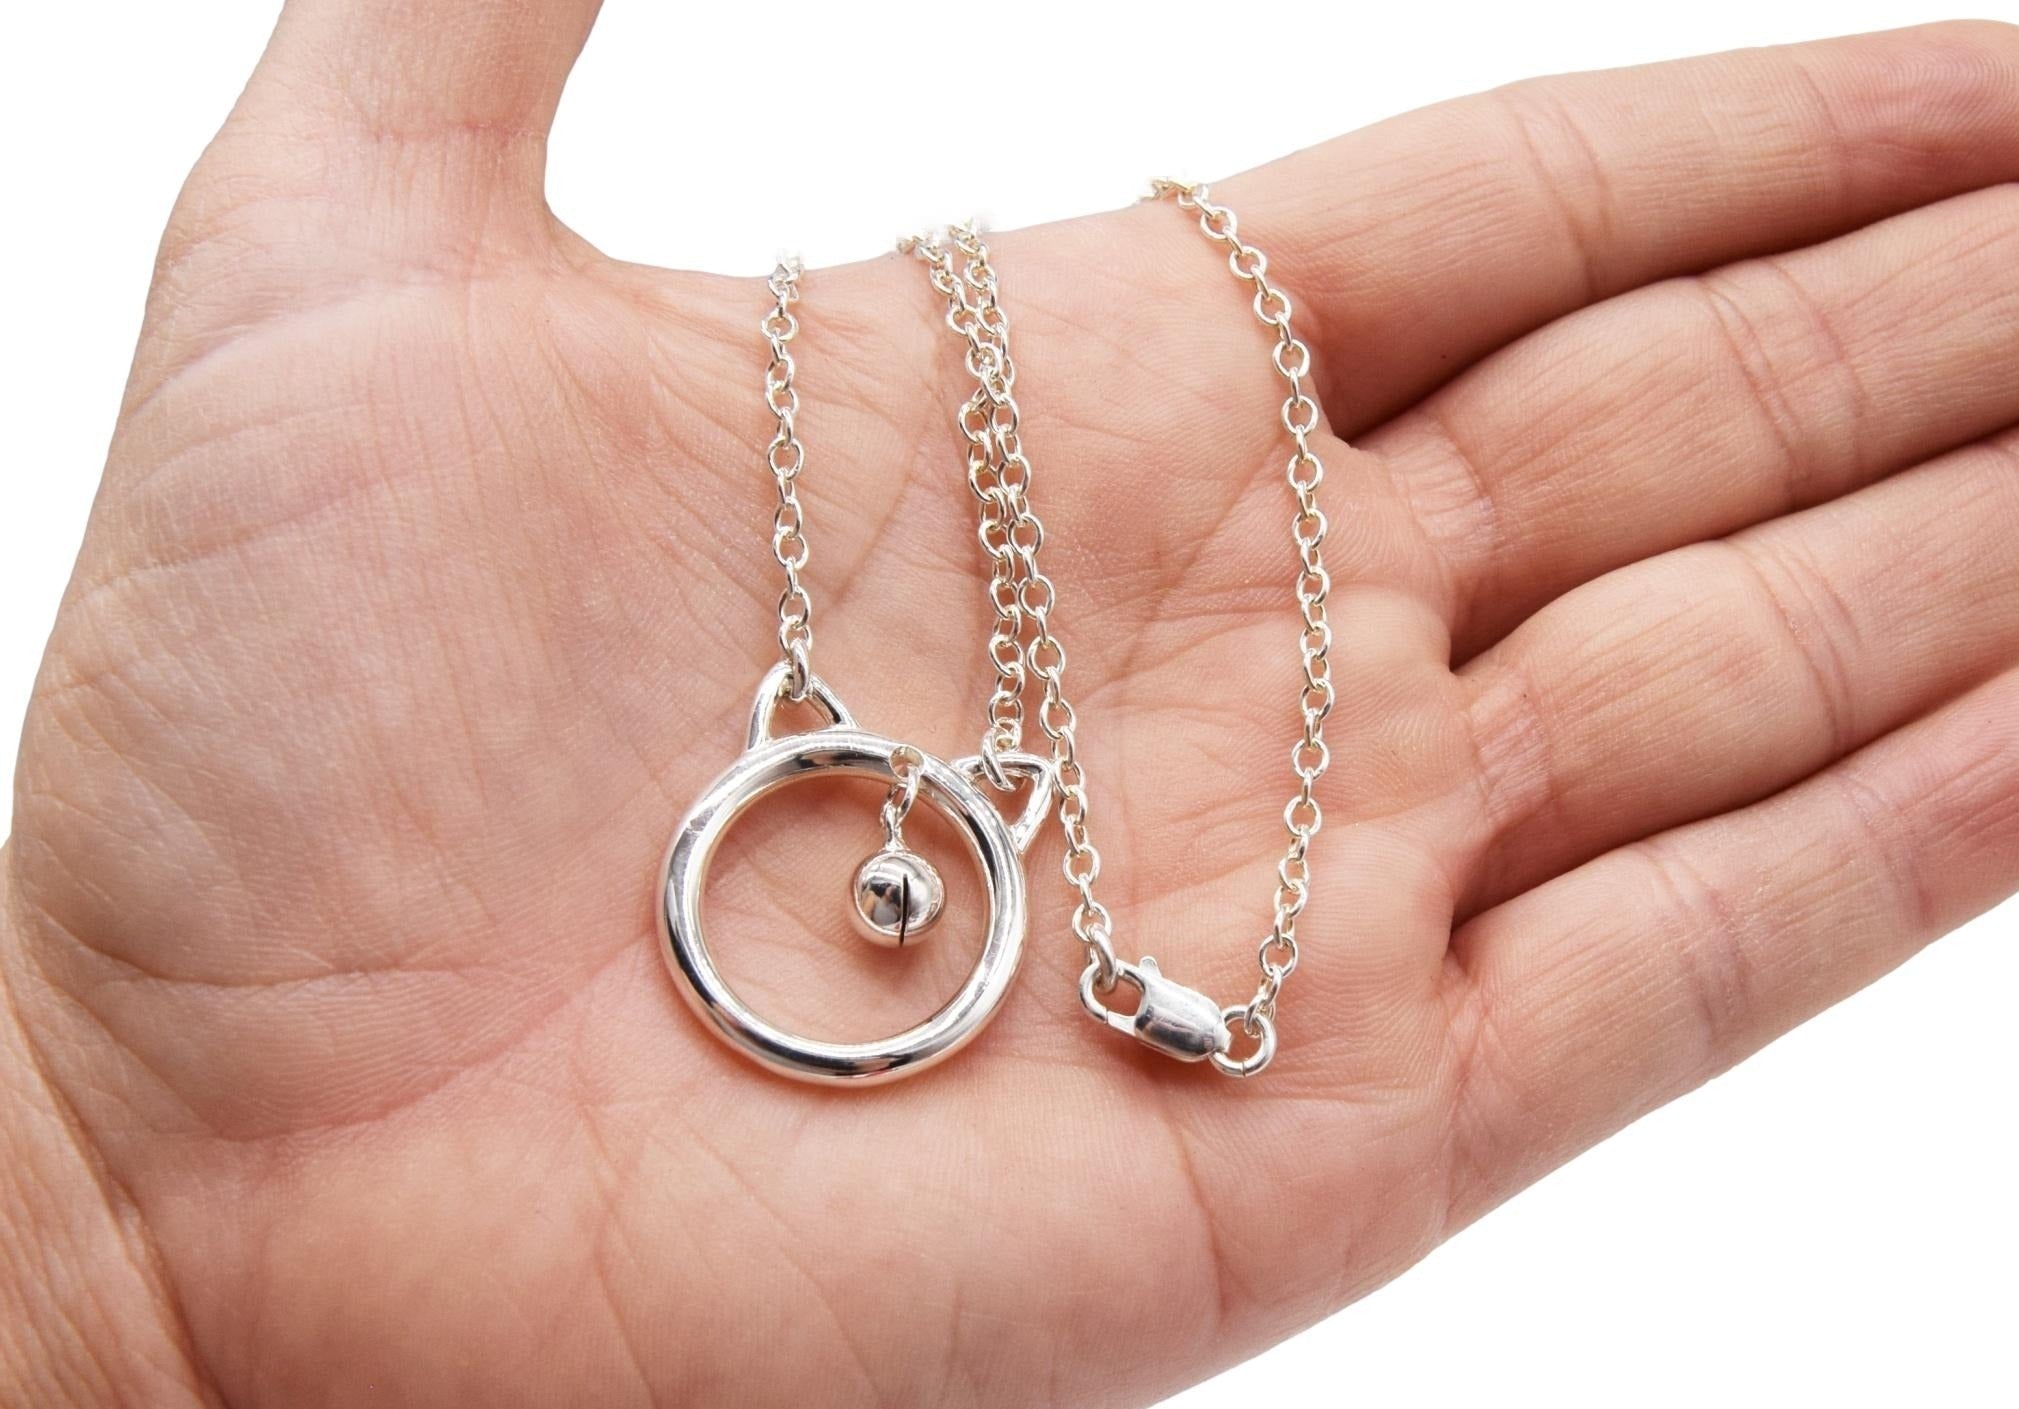 BDSM Locking Day Collar Jewelry Necklace of Lock and O ring with large sterling bell available in solid 316L Stainless Steel or 925 sterling silver shown on a model's hand